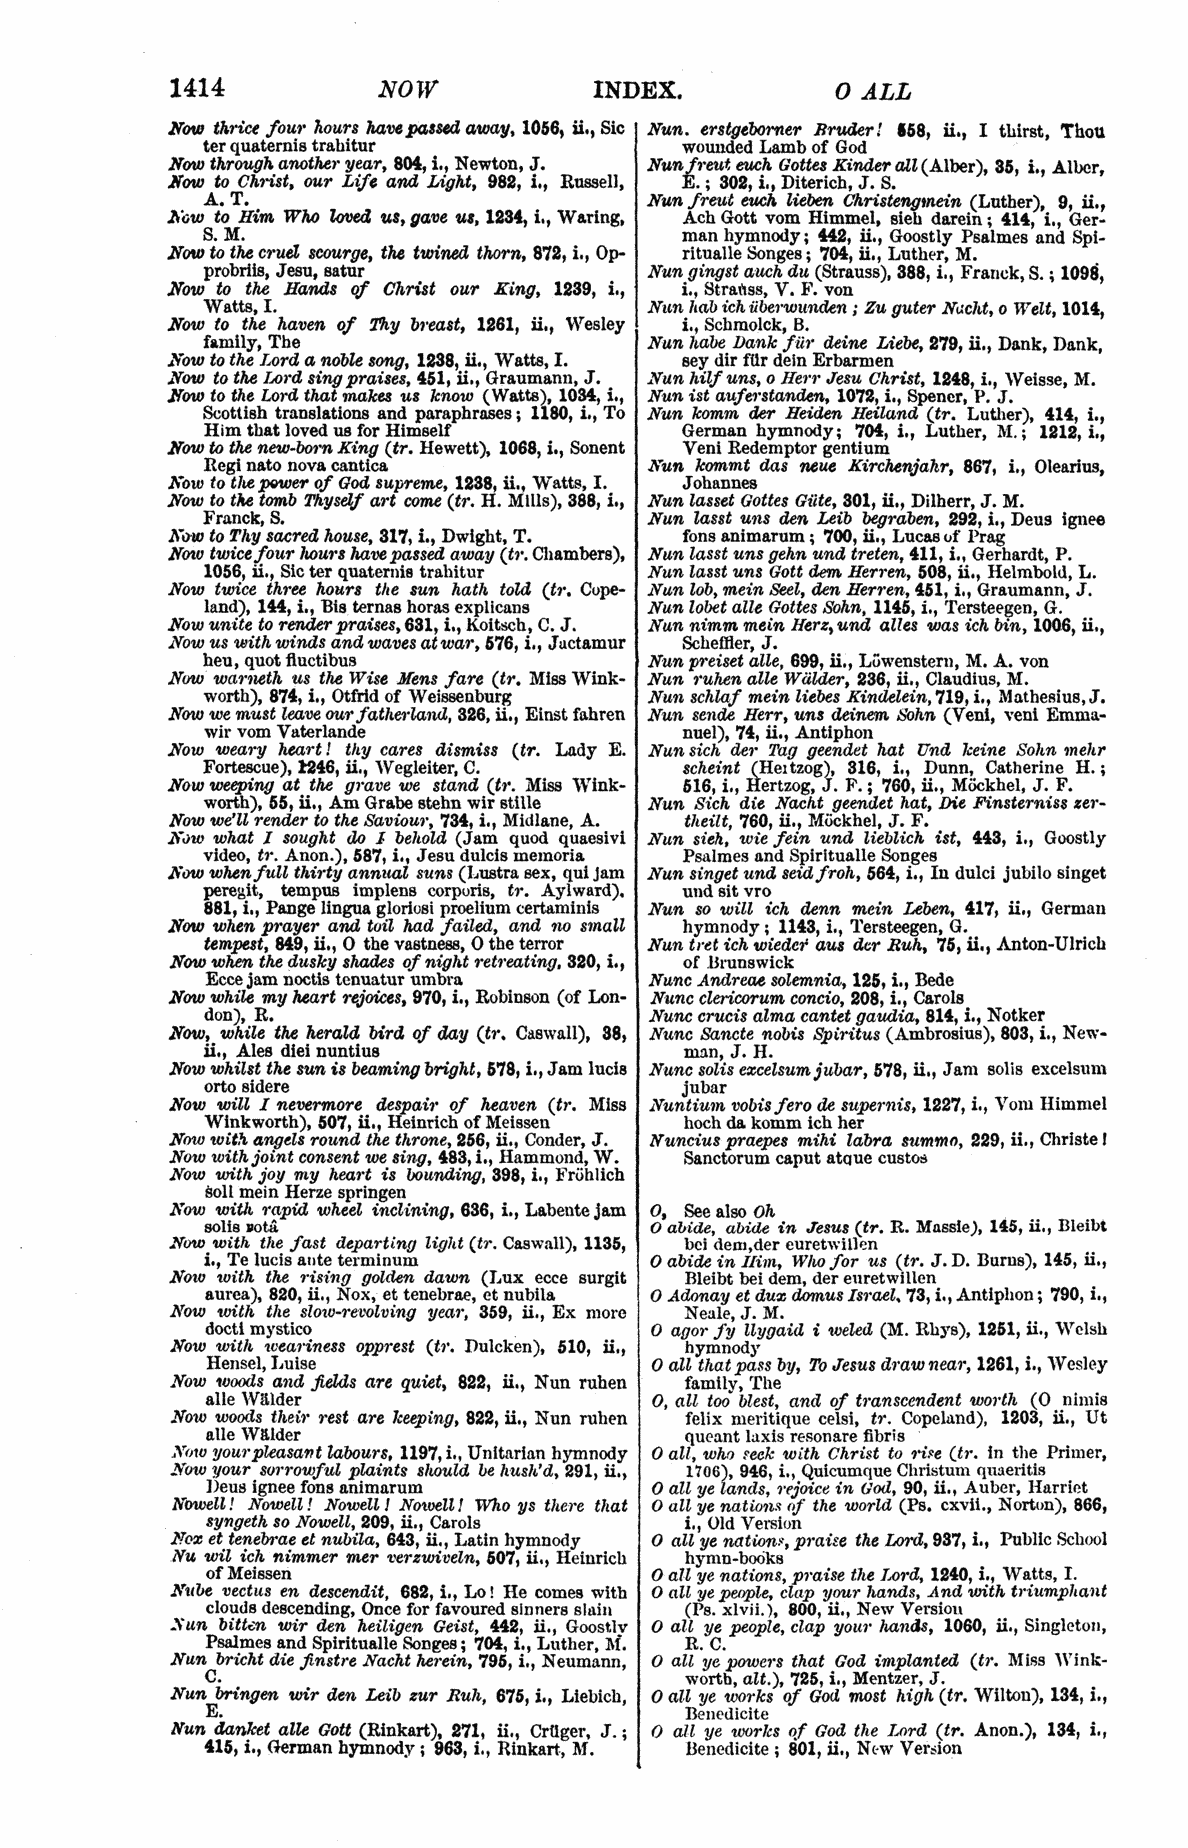 Image of page 1414